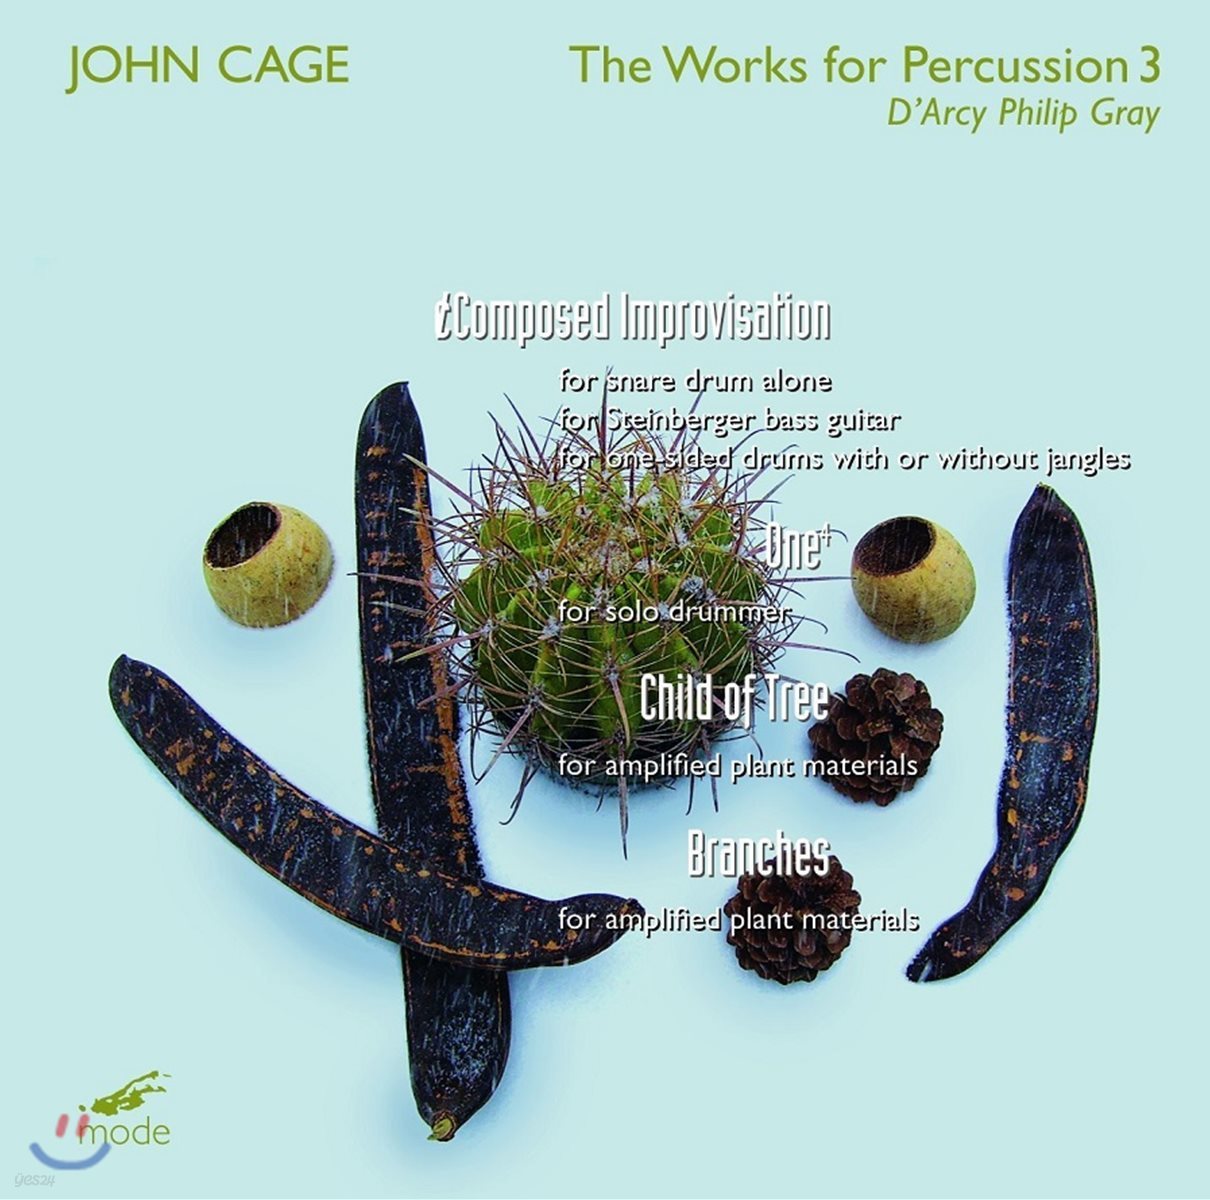 D'Arcy Philip Gray 존 케이지: 타악기 작품 3집 - 나무의 아이, 가지 외 (John Cage: The Works for Percussion 3)